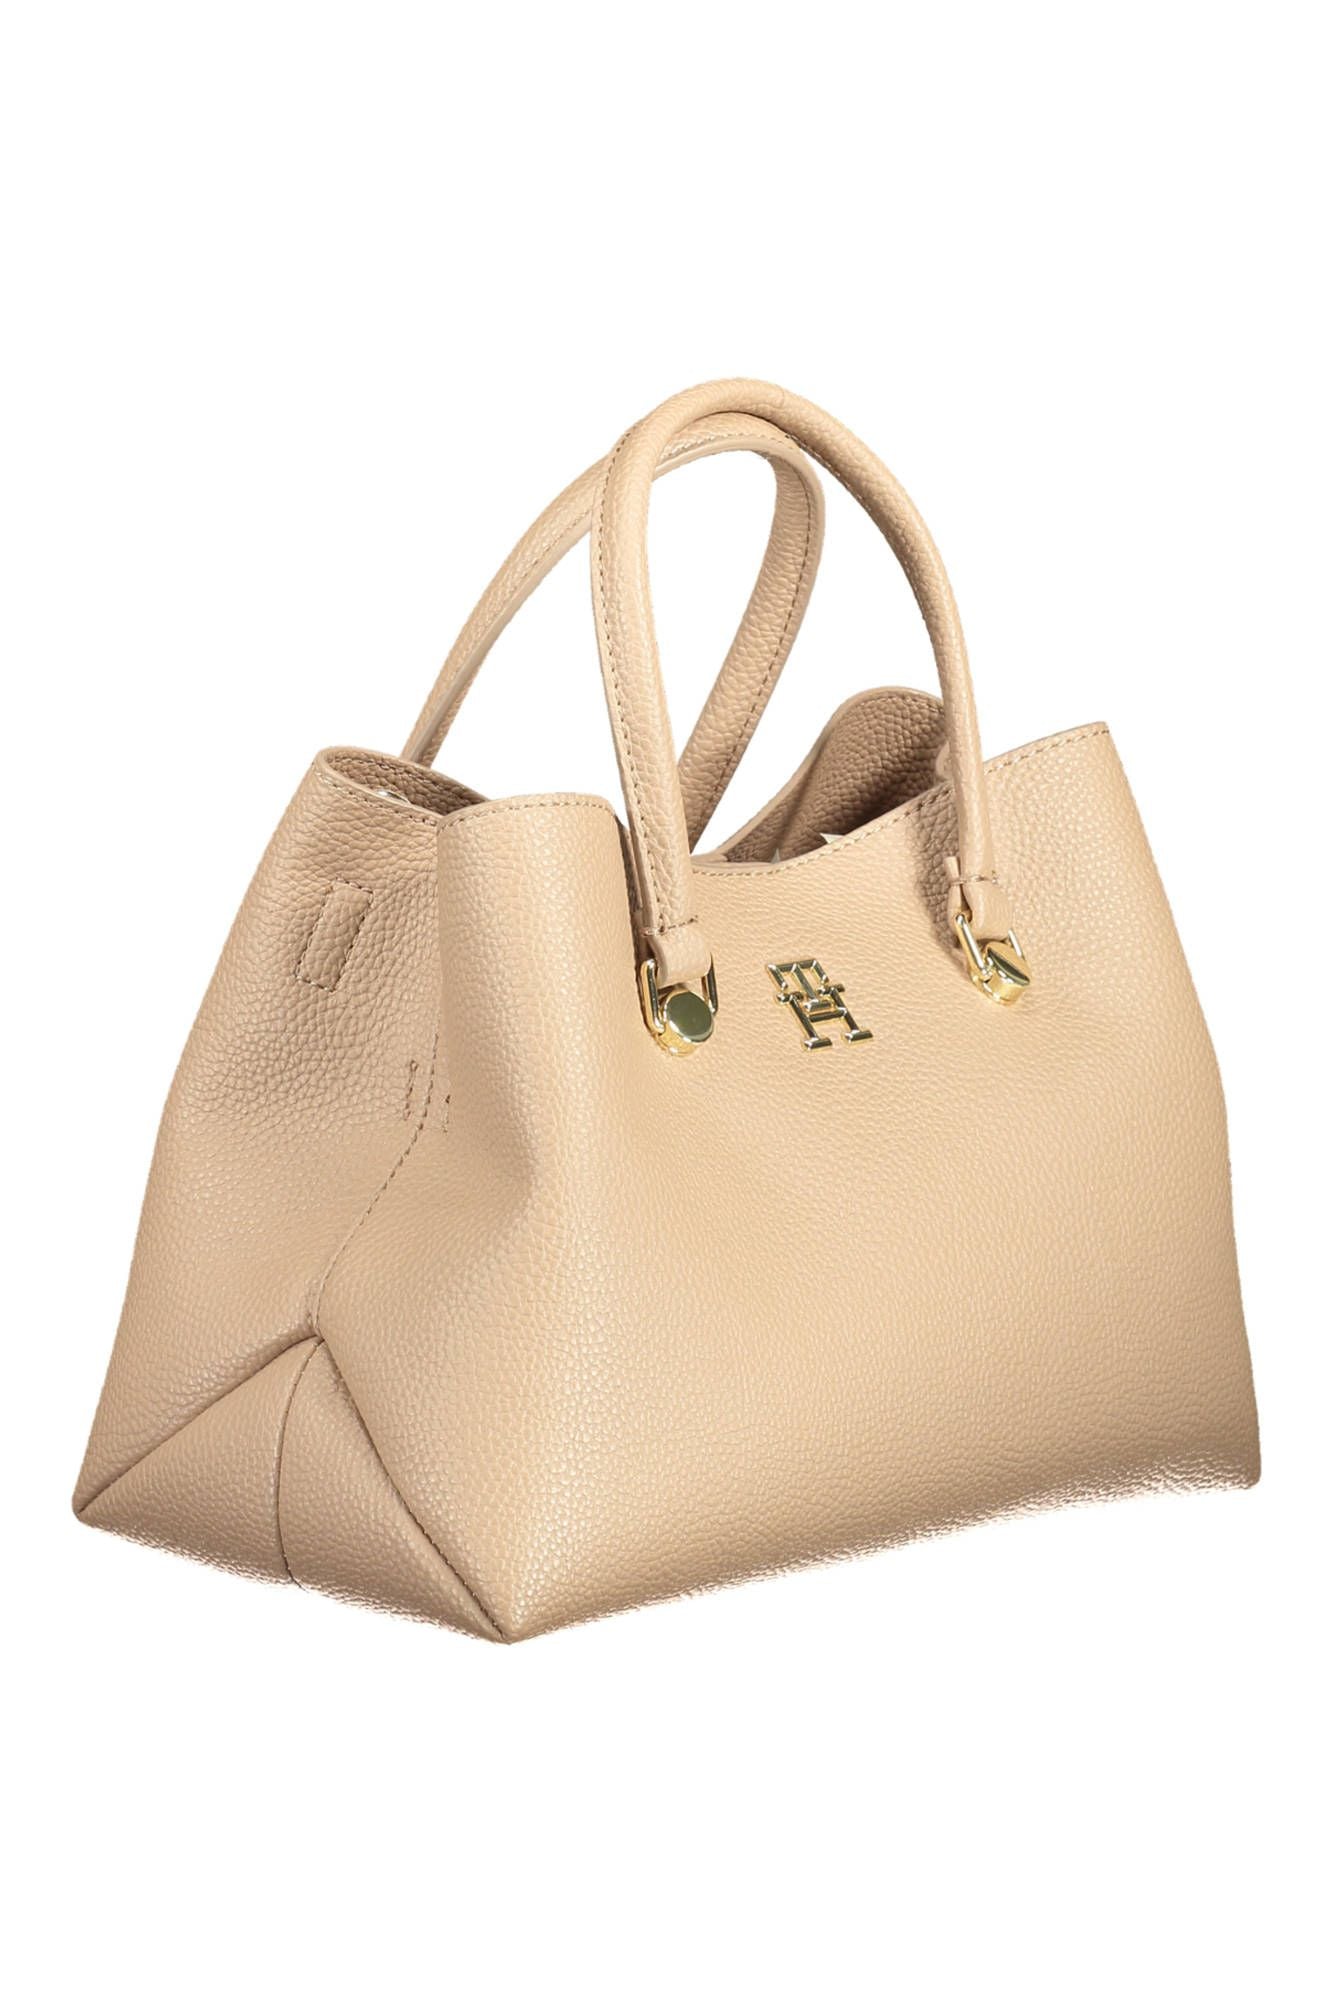 Chic Beige Daily Tote with Timeless Appeal